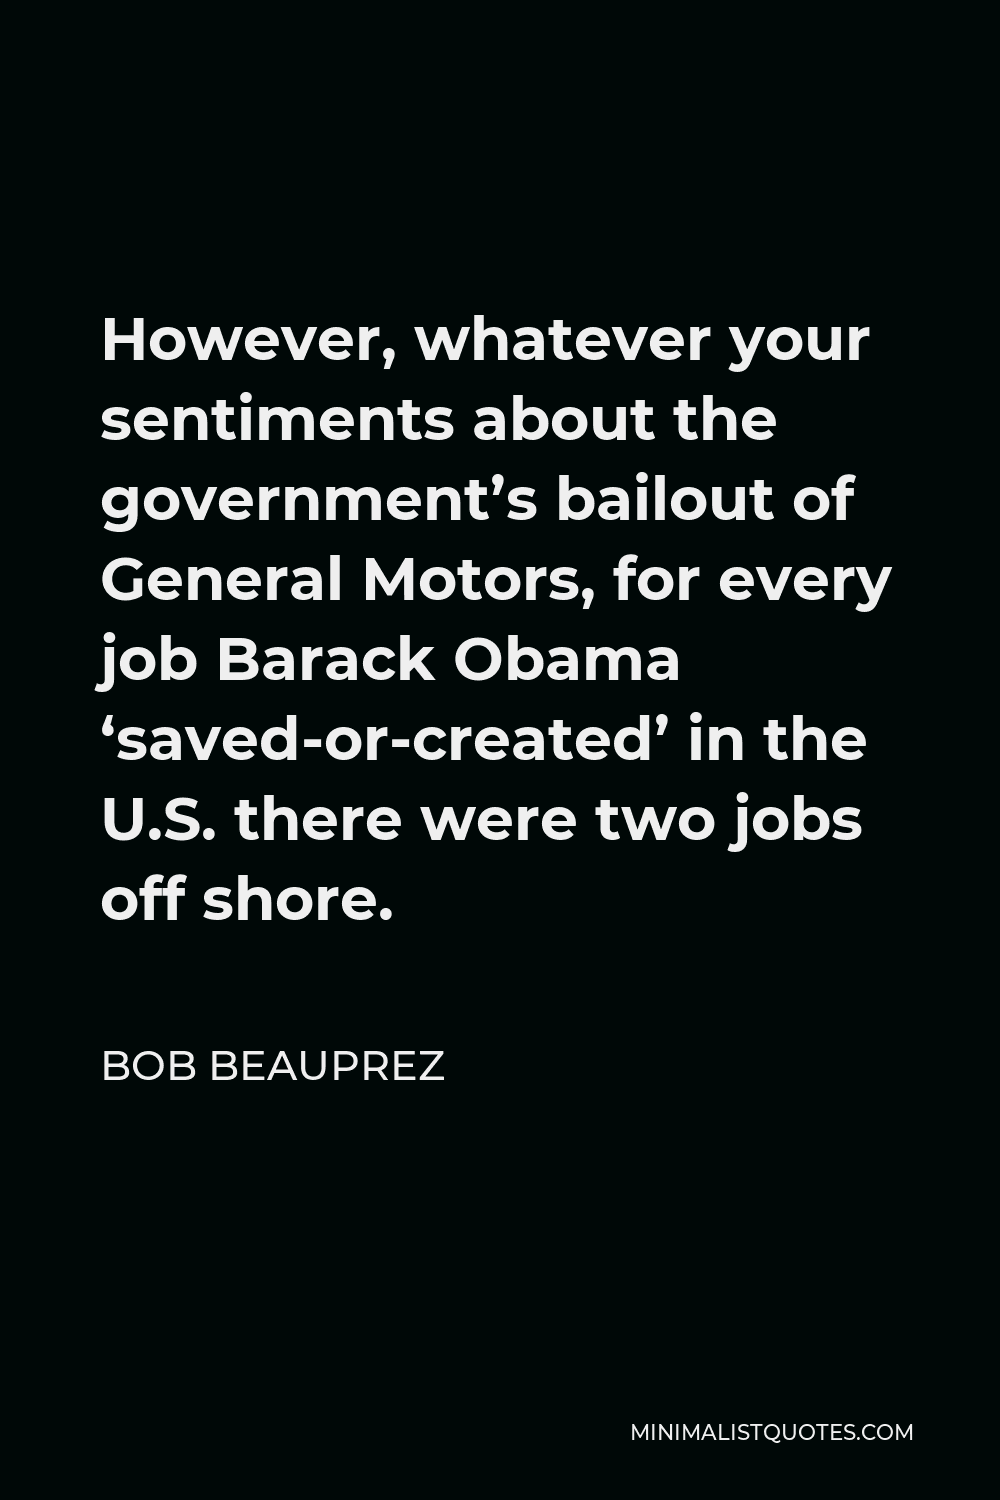 Bob Beauprez Quote - However, whatever your sentiments about the government’s bailout of General Motors, for every job Barack Obama ‘saved-or-created’ in the U.S. there were two jobs off shore.